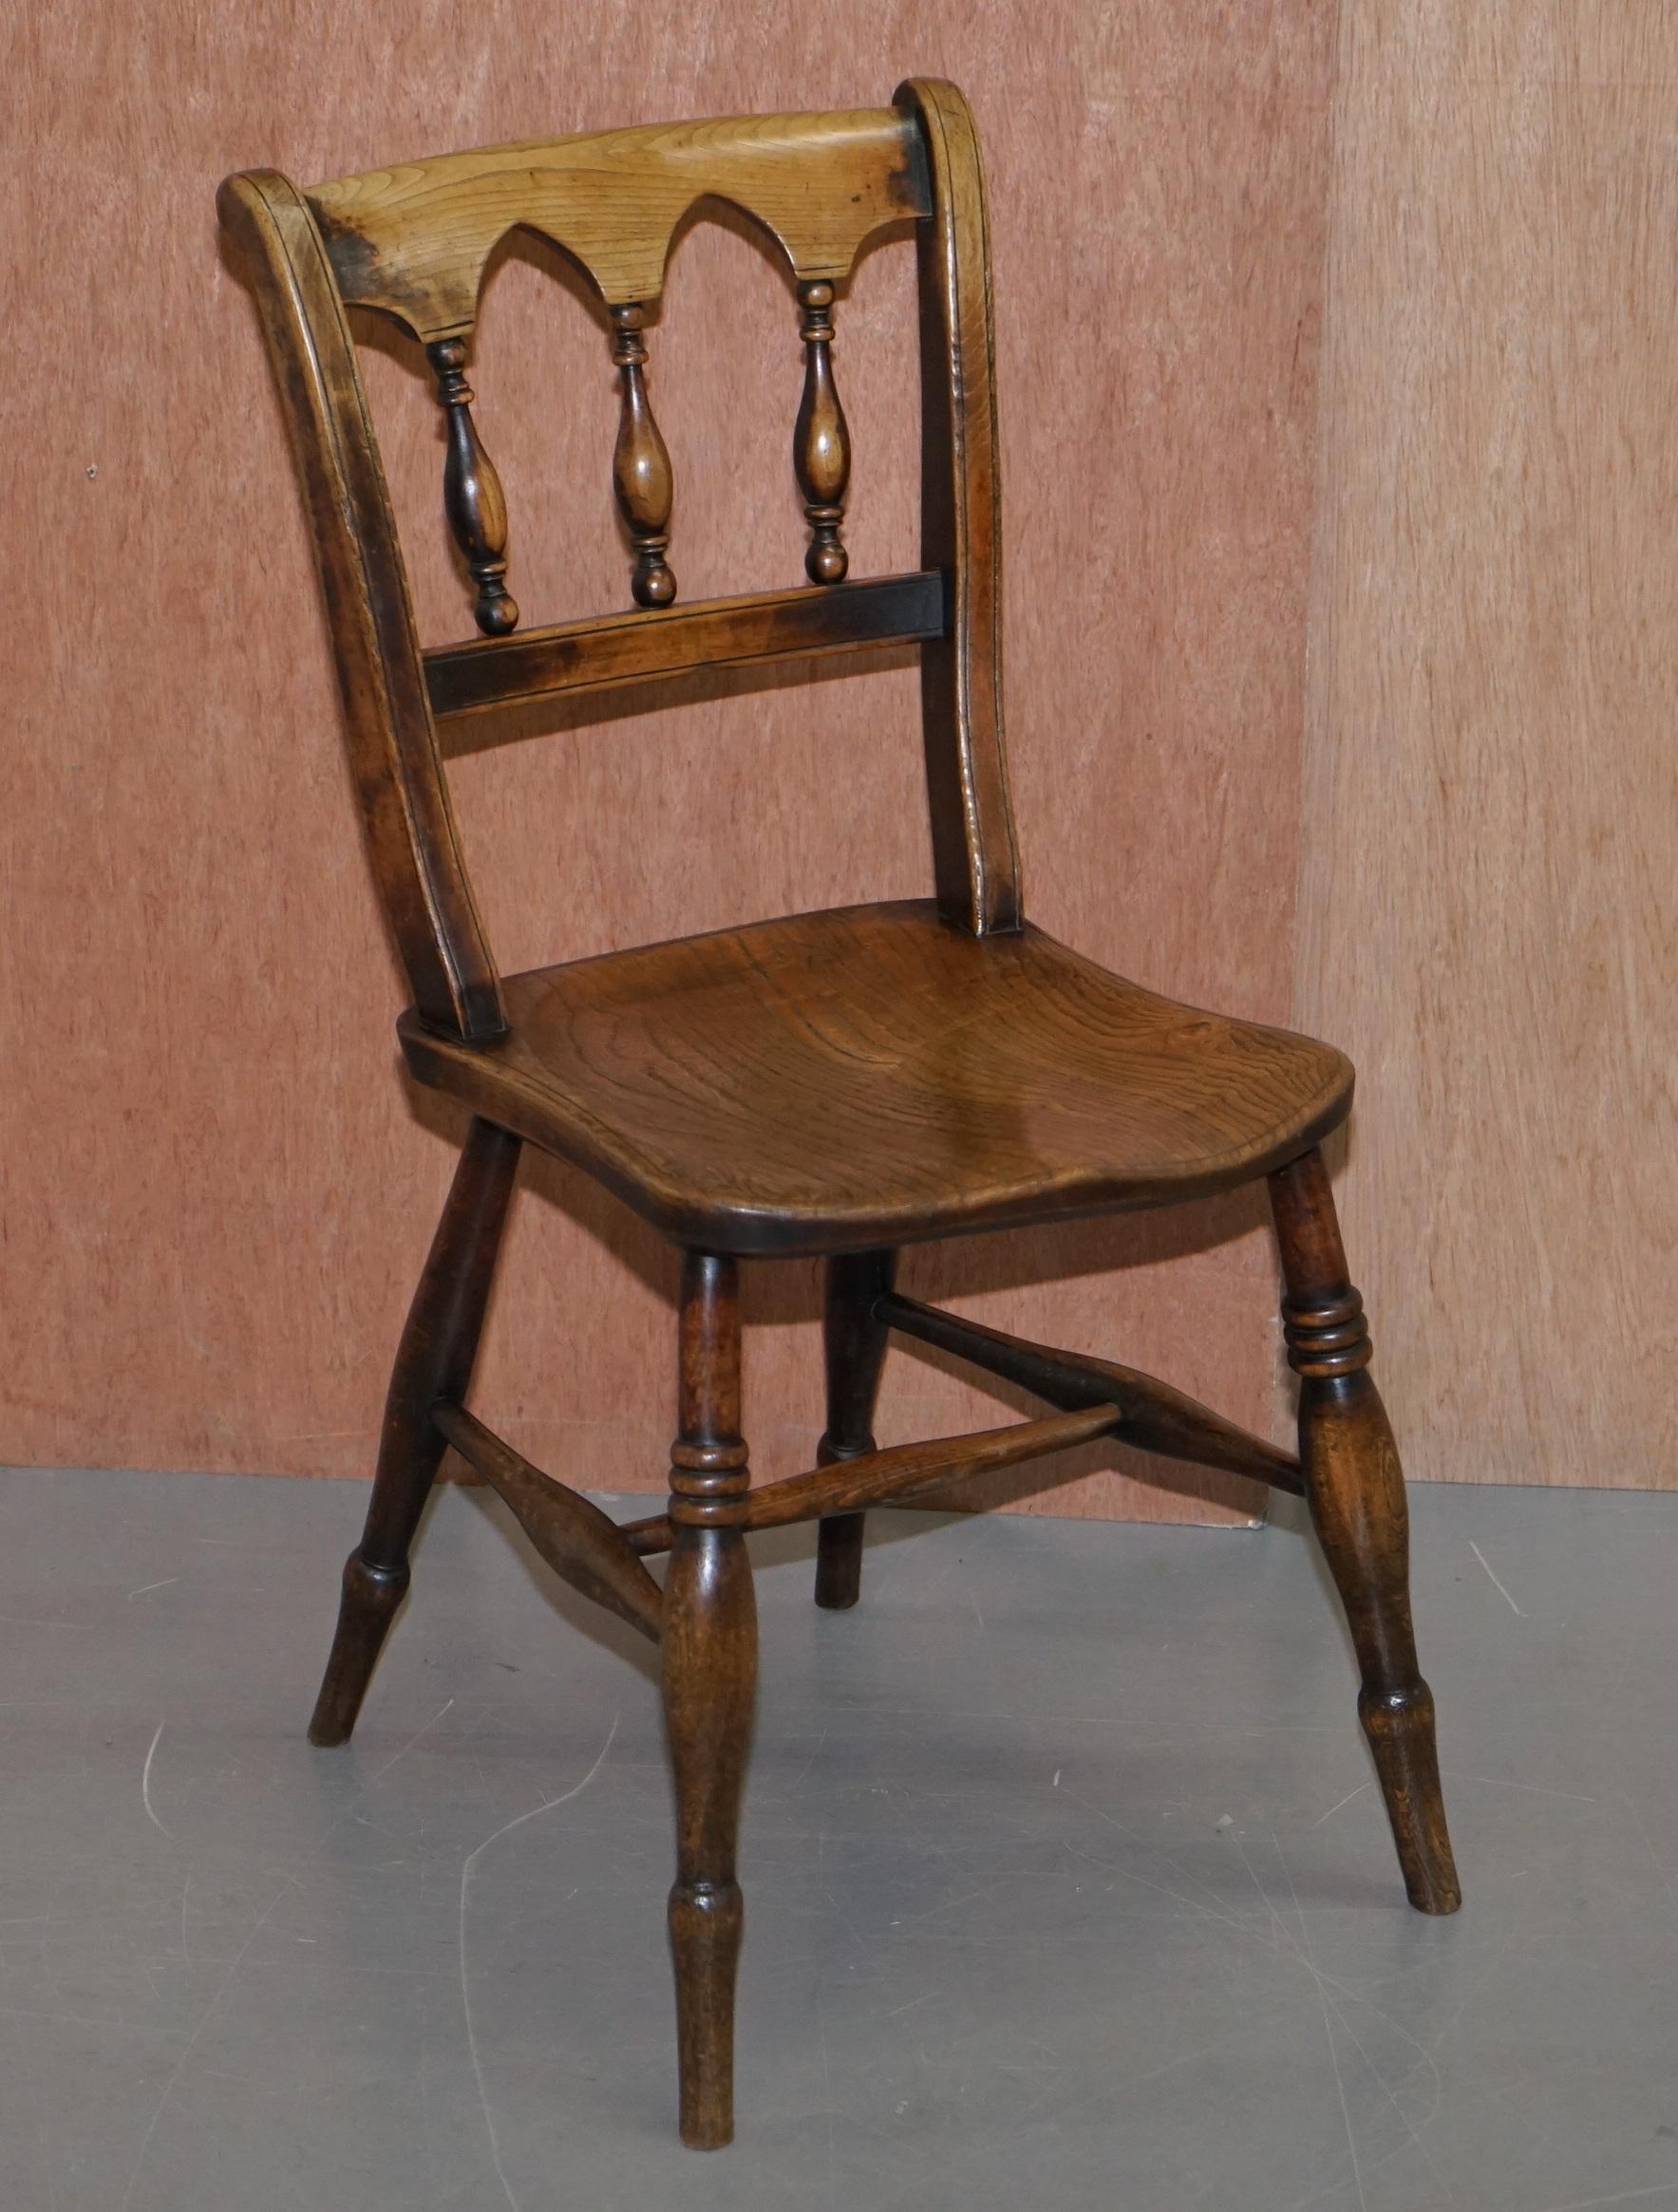 We are delighted to offer for sale this sublime suite of eight original early Victorian circa 1840 Thames valley Elm diming chairs 

A very collectable and quintessentially English set of dining chairs. The frames are solid Elm, they are made from